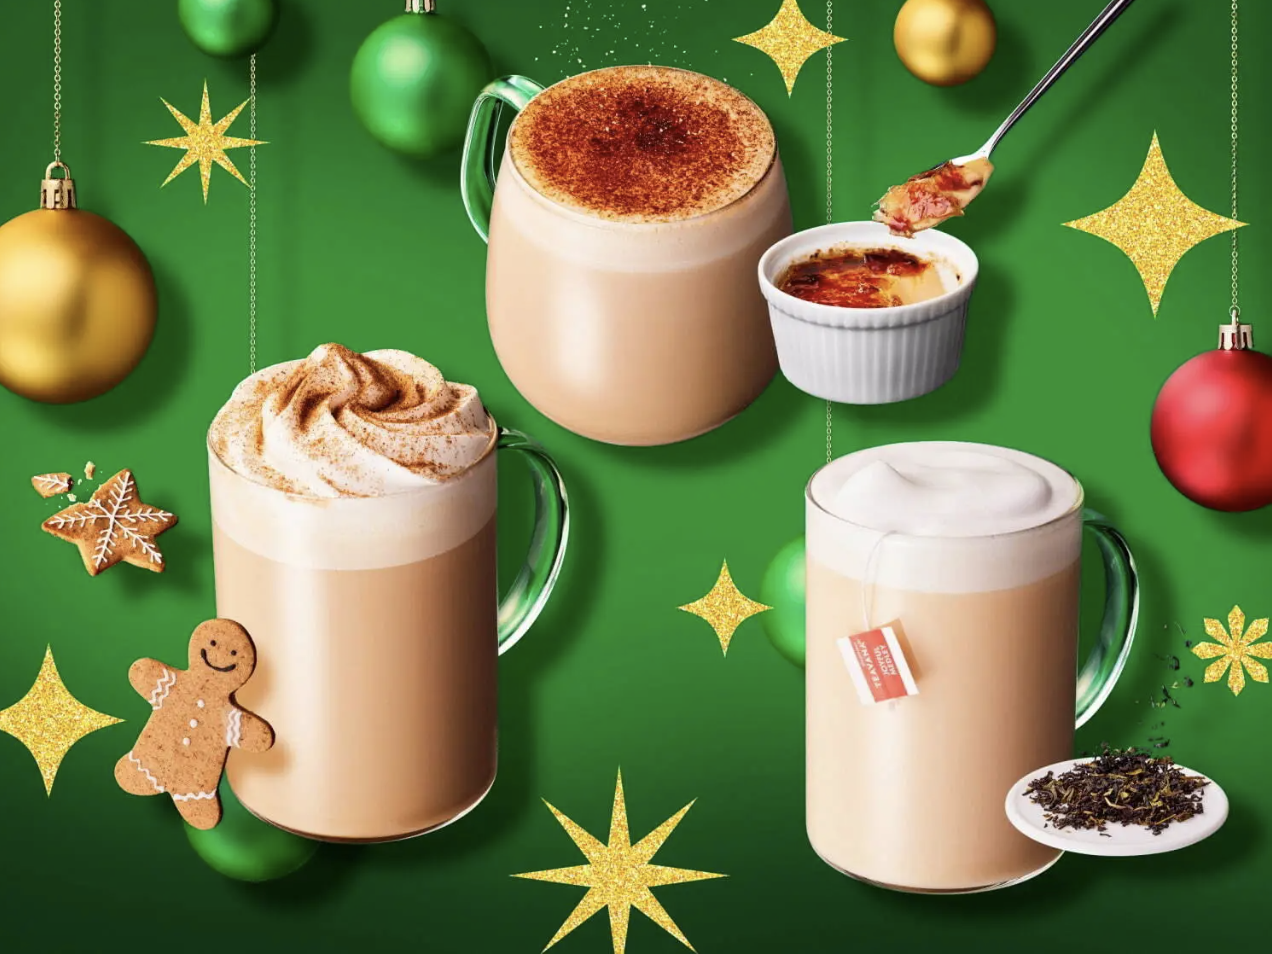 Starbucks Japan unveils new Christmas Frappuccino and drinks for